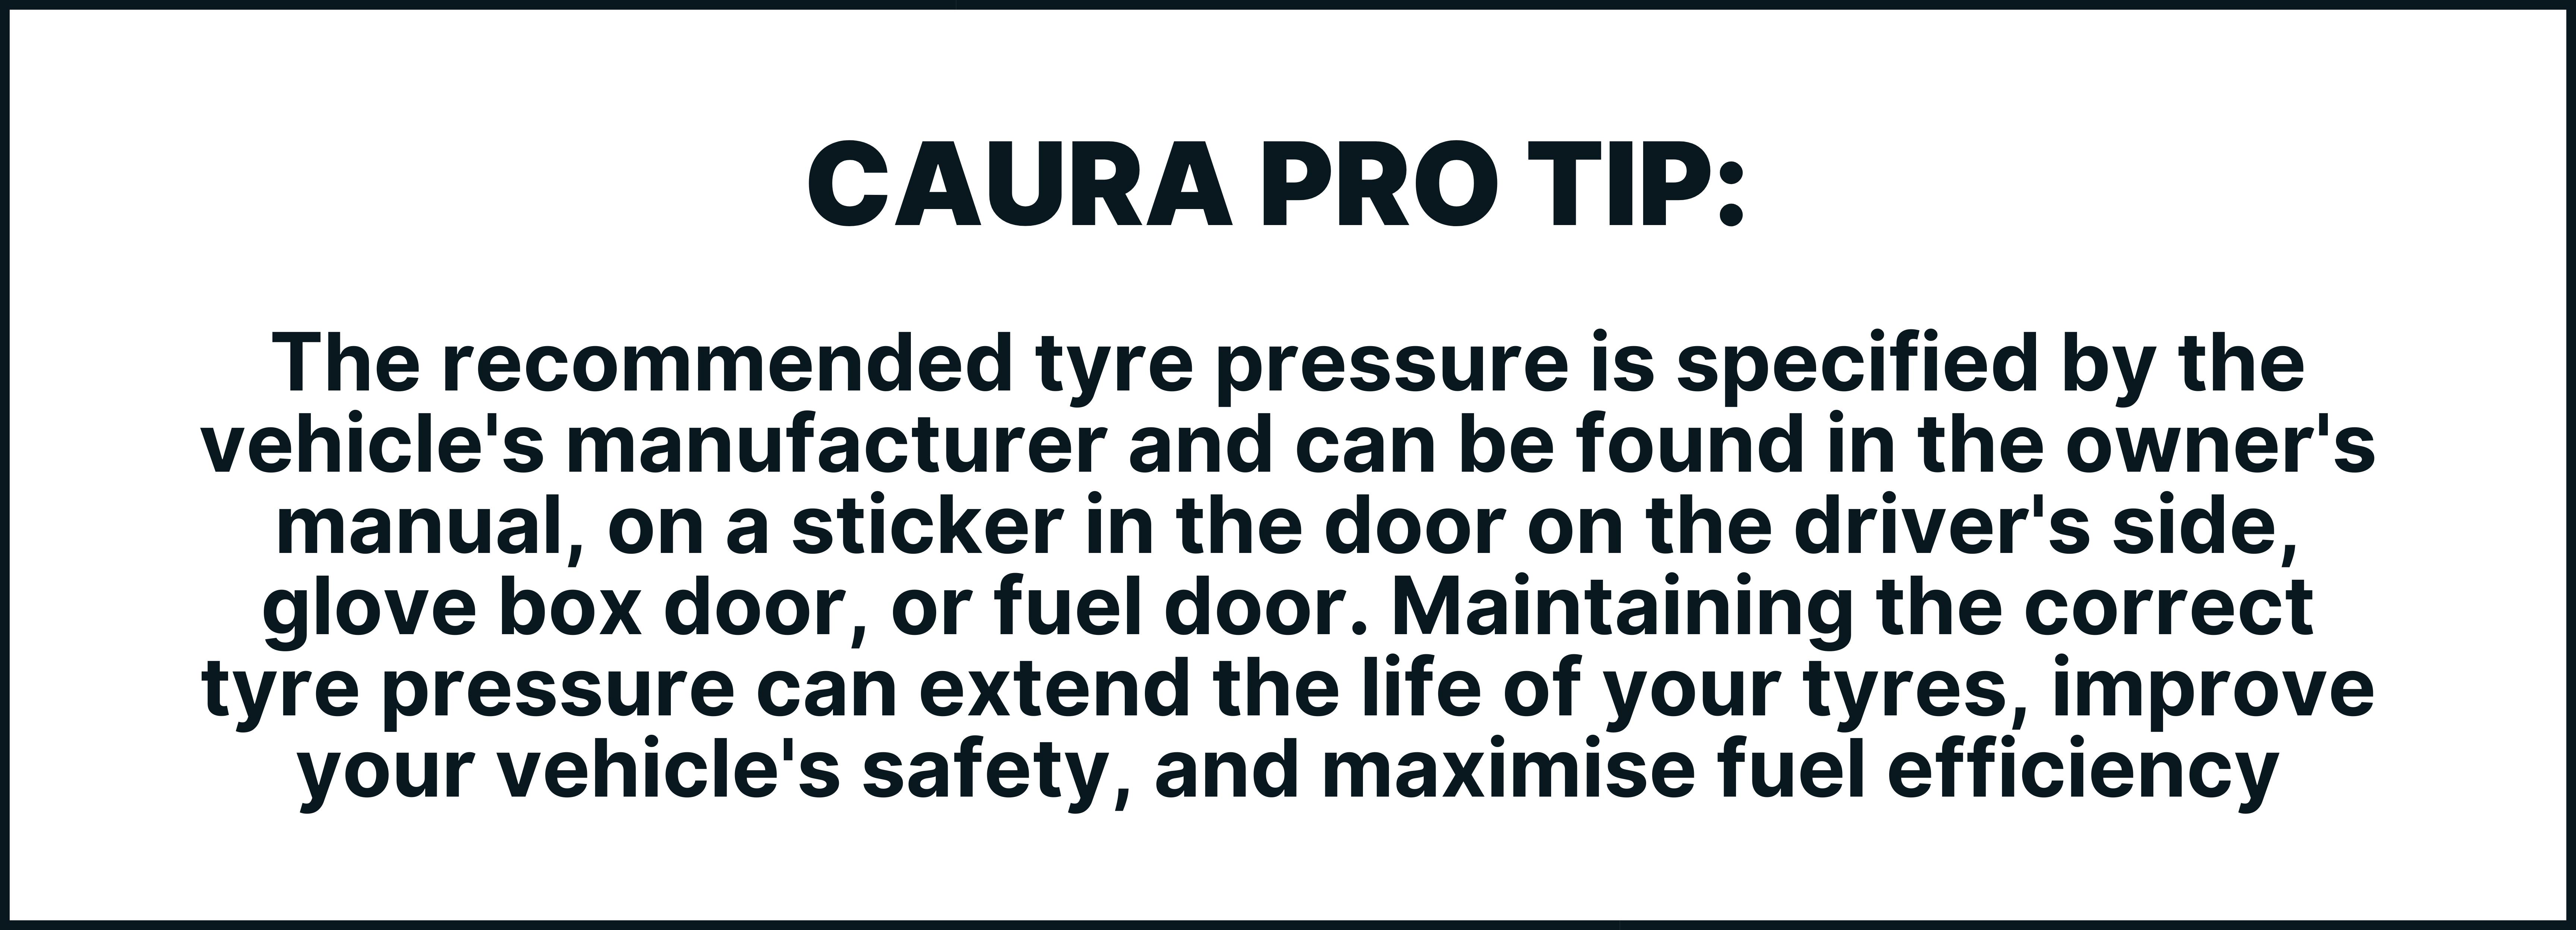 The recommended tyre pressure is specified by the vehicle's manufacturer and can be found in the owner's manual, on a sticker in the door on the driver's side, glove box door, or fuel door. Maintaining the correct tyre pressure can extend the life of your tyres, improve your vehicle's safety, and maximise fuel efficiency